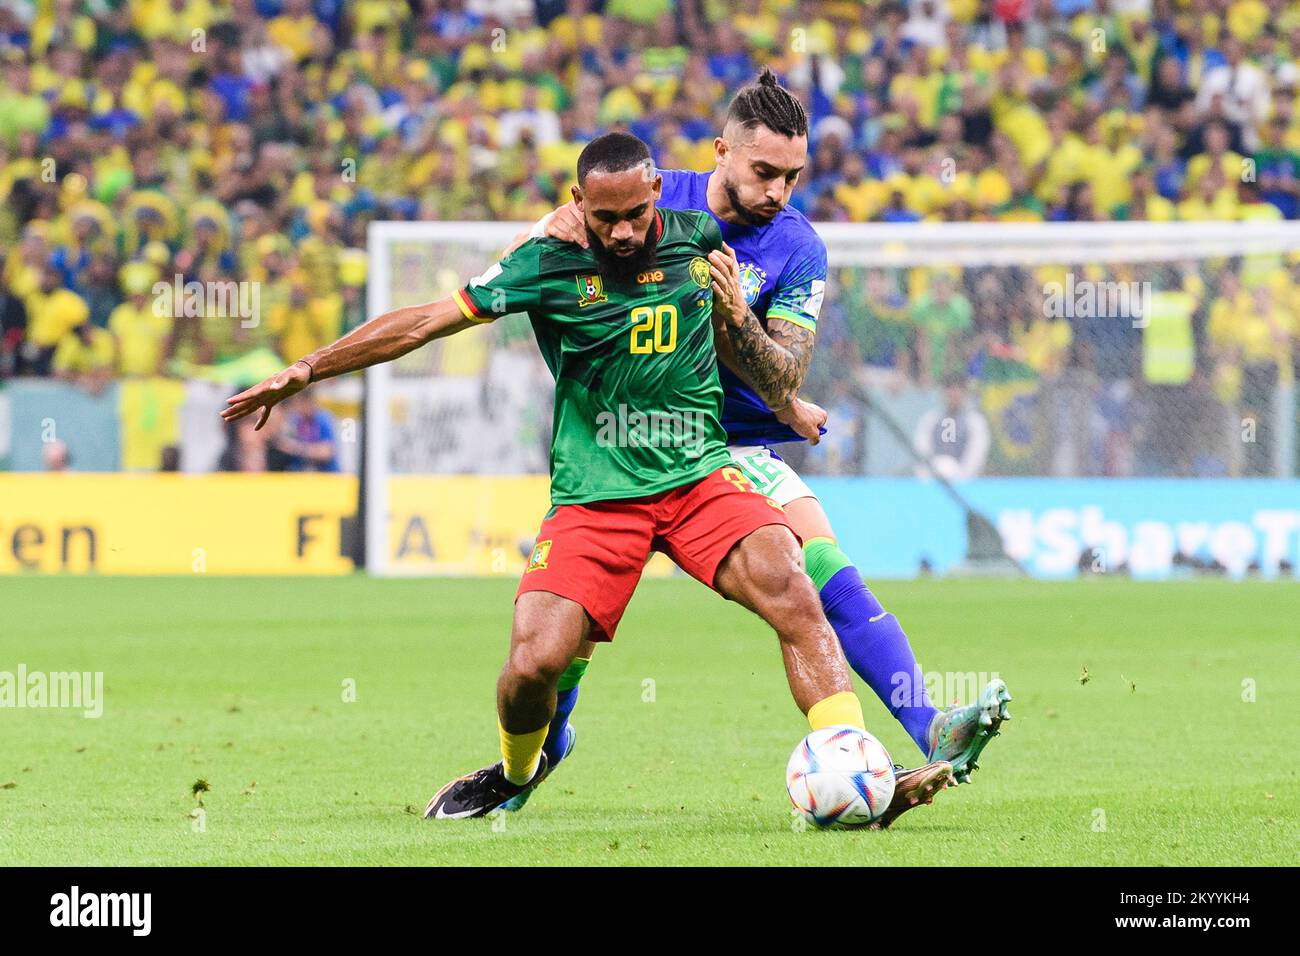 Lusail, Qatar. 02nd Dec, 2022. Estadio Nacional de Lusail Bryan Mbeumo of Cameroon and Alex Telles of Brazil during a match between Cameroon and Brazil, valid for the group stage of the World Cup, held at the Estadio Nacional de Lusail in Lusail, Qatar. (Marcio Machado/SPP) Credit: SPP Sport Press Photo. /Alamy Live News Stock Photo